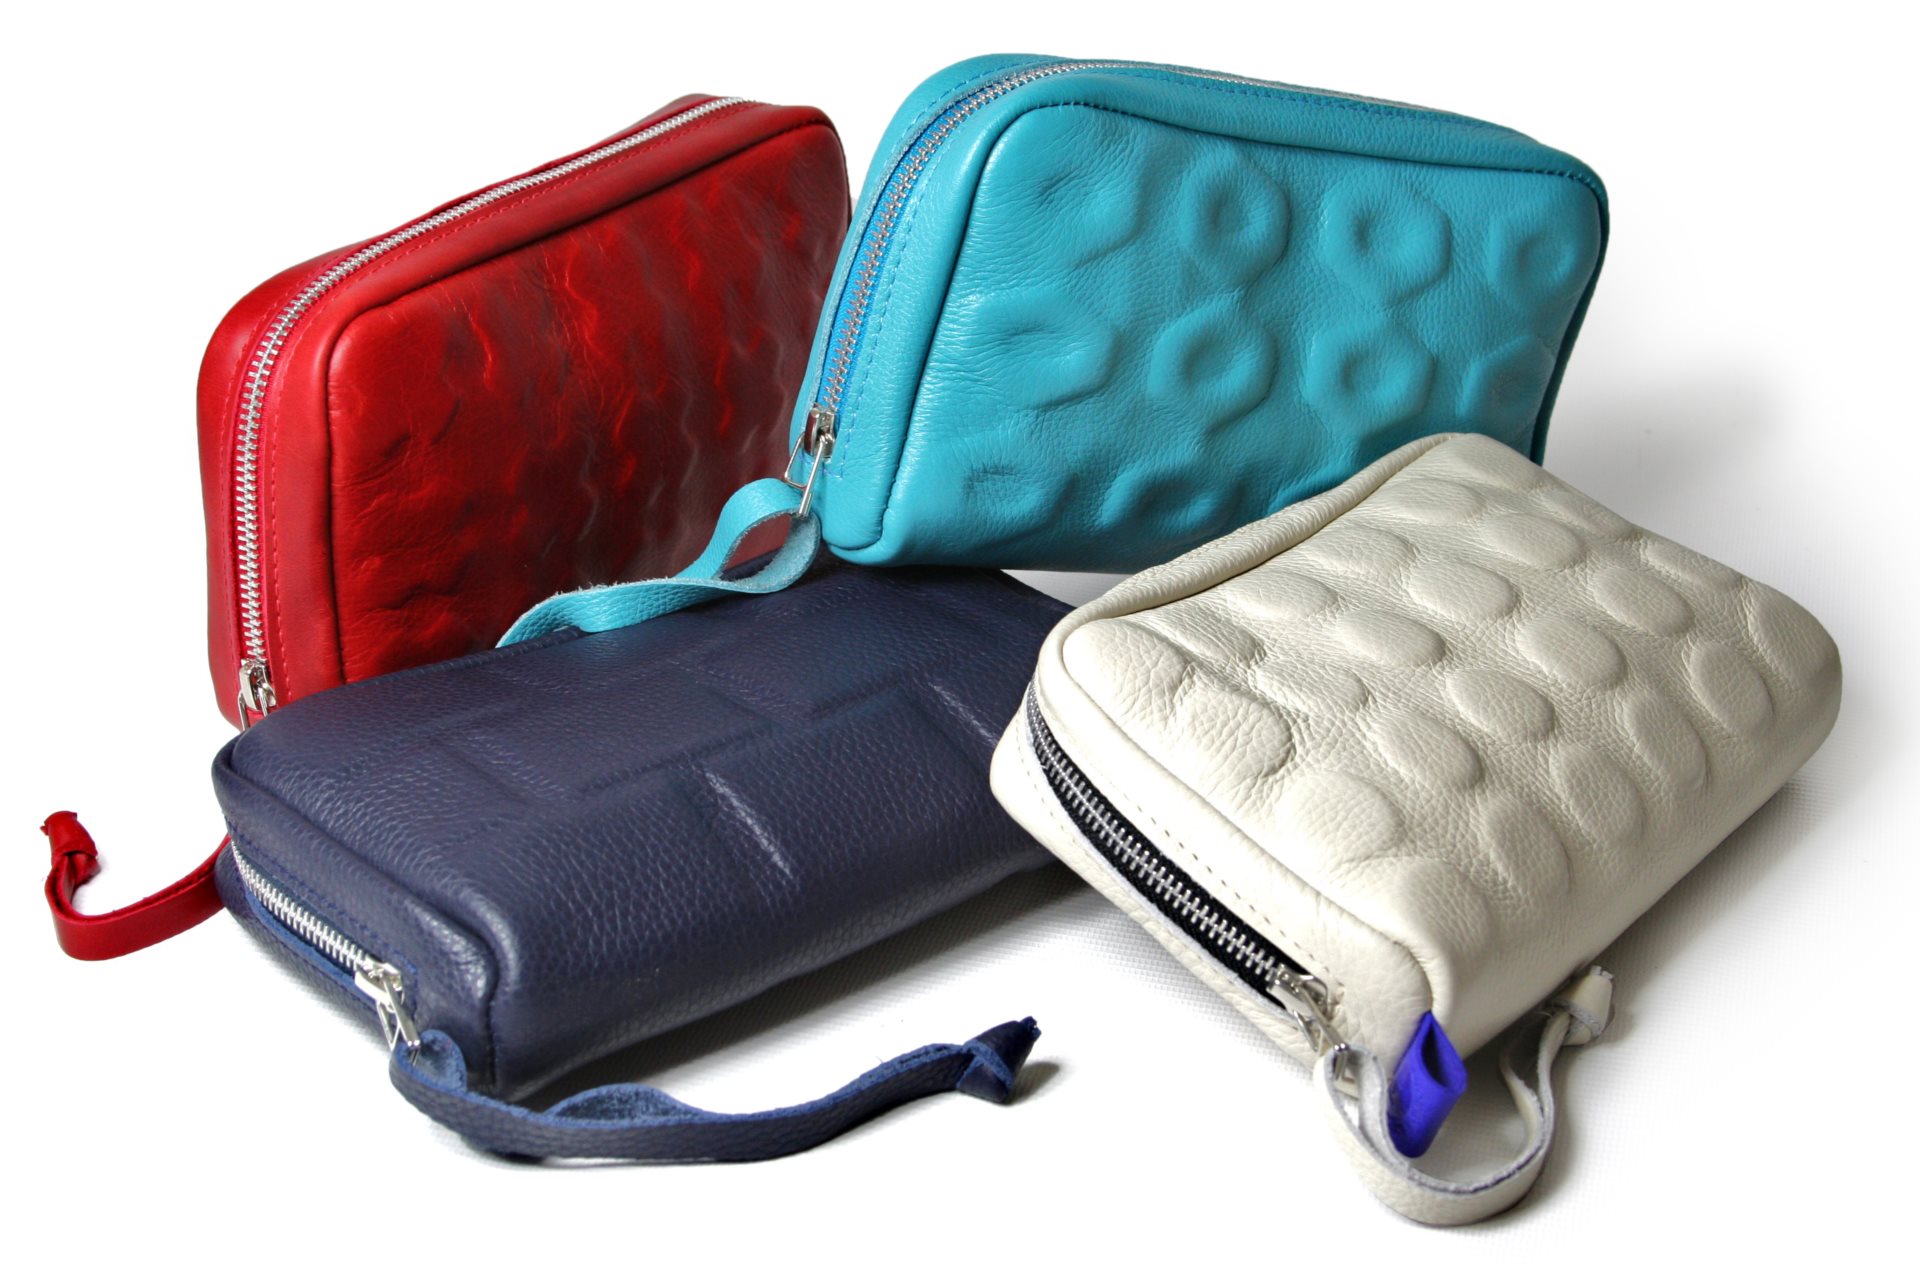 Profiled Make Up / Zip Clutch Bags 